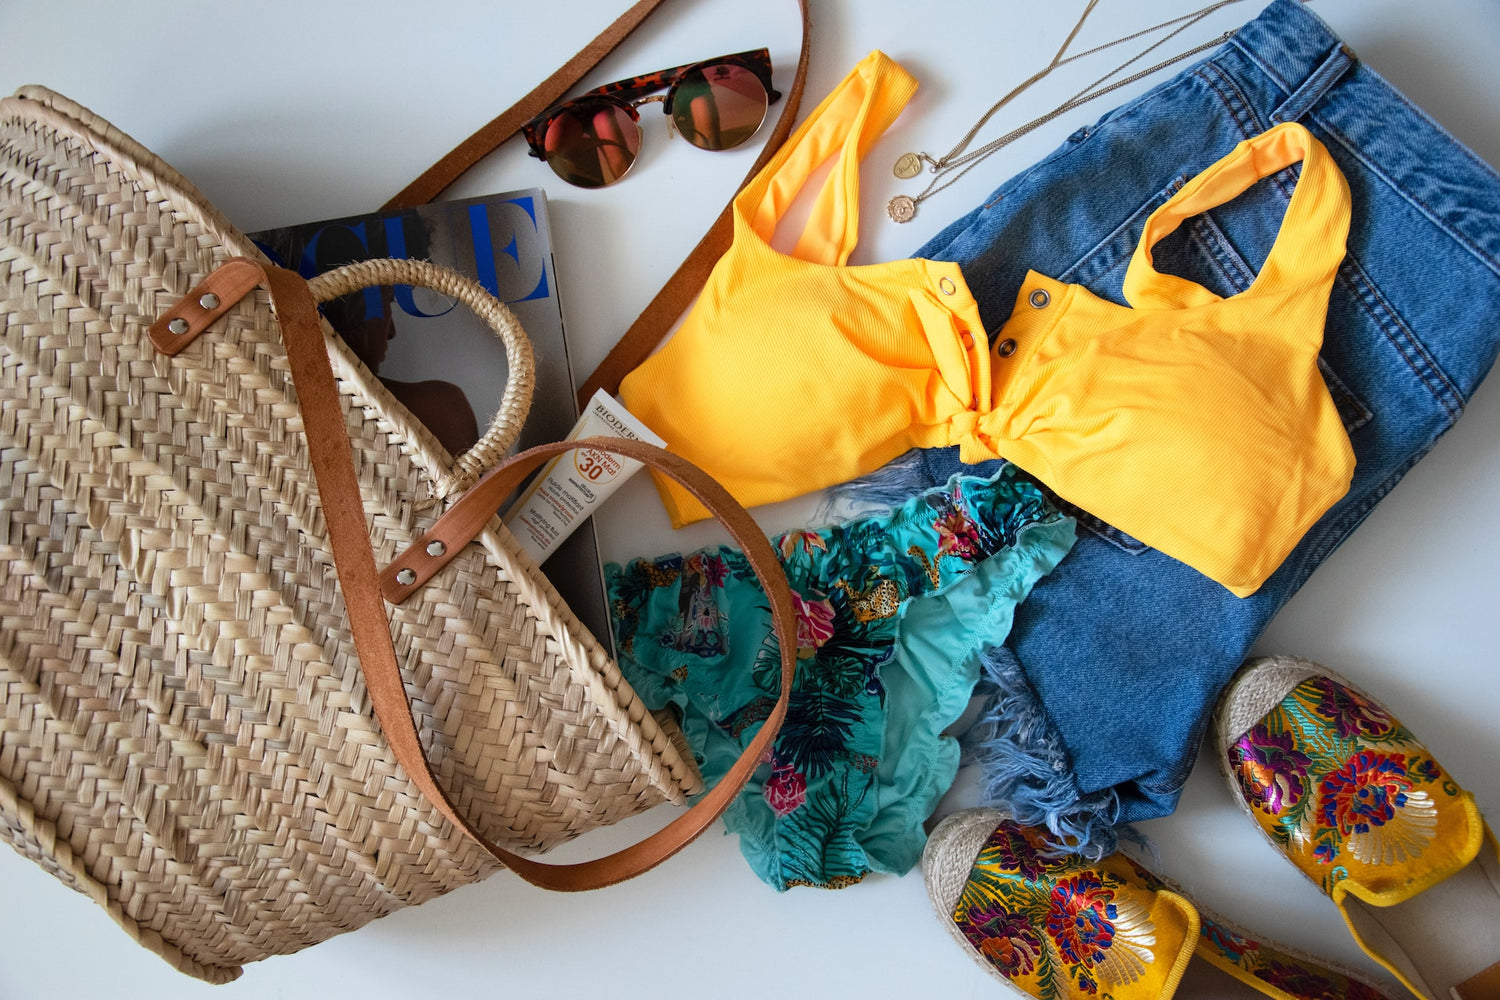 From Beach to Brunch: How to Make the Most of Your Straw Bag